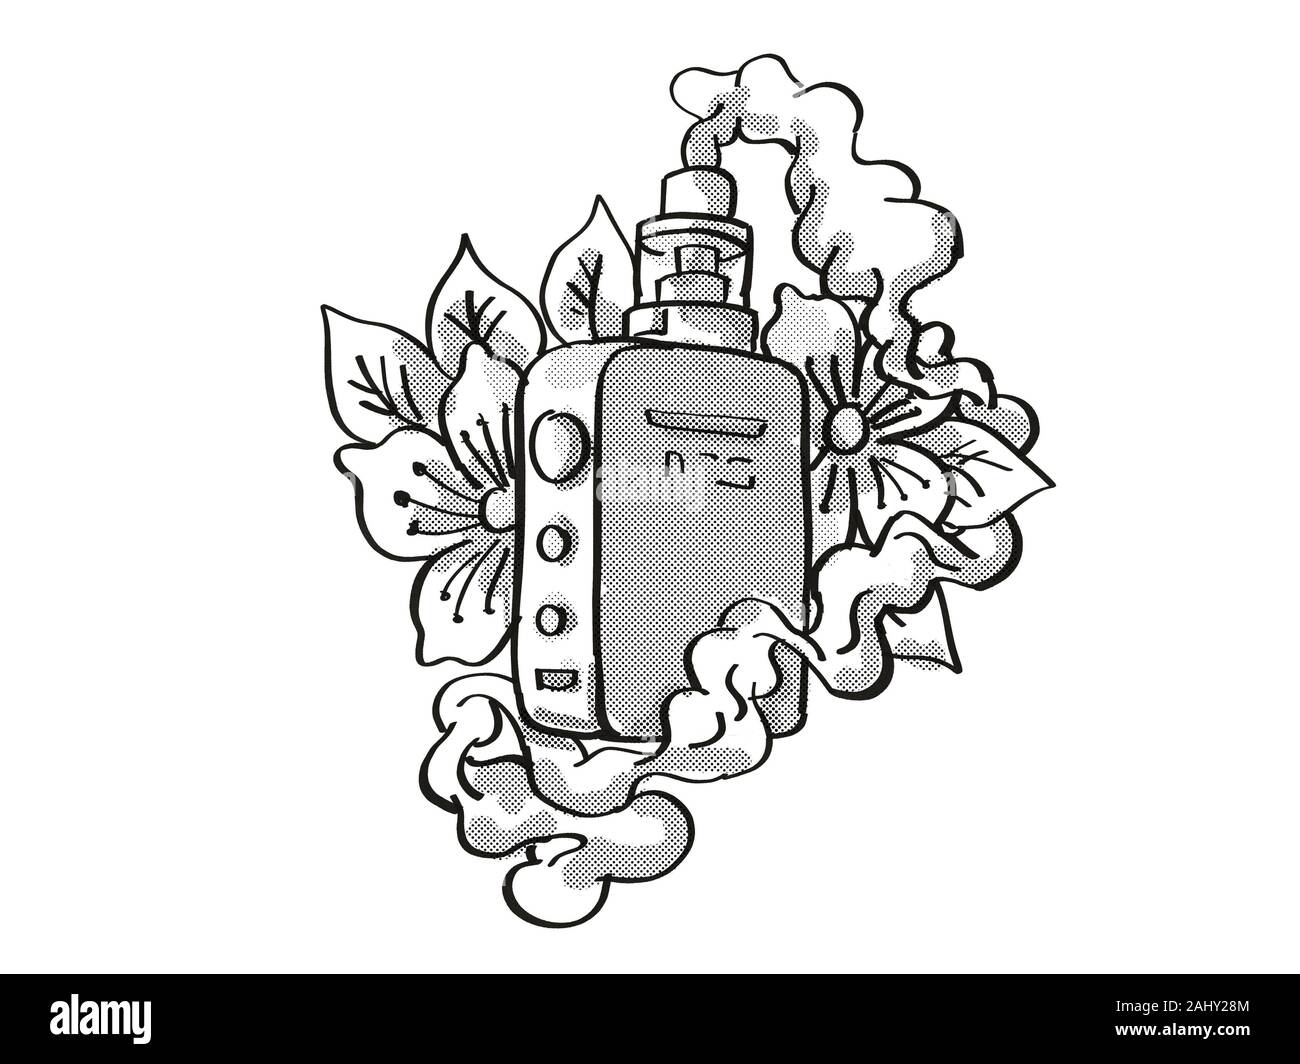 Tattoo cartoon style drawing illustration of a vape electronic cigarette or  vaper smoking with leaves and flower on isolated background done in black  Stock Photo - Alamy